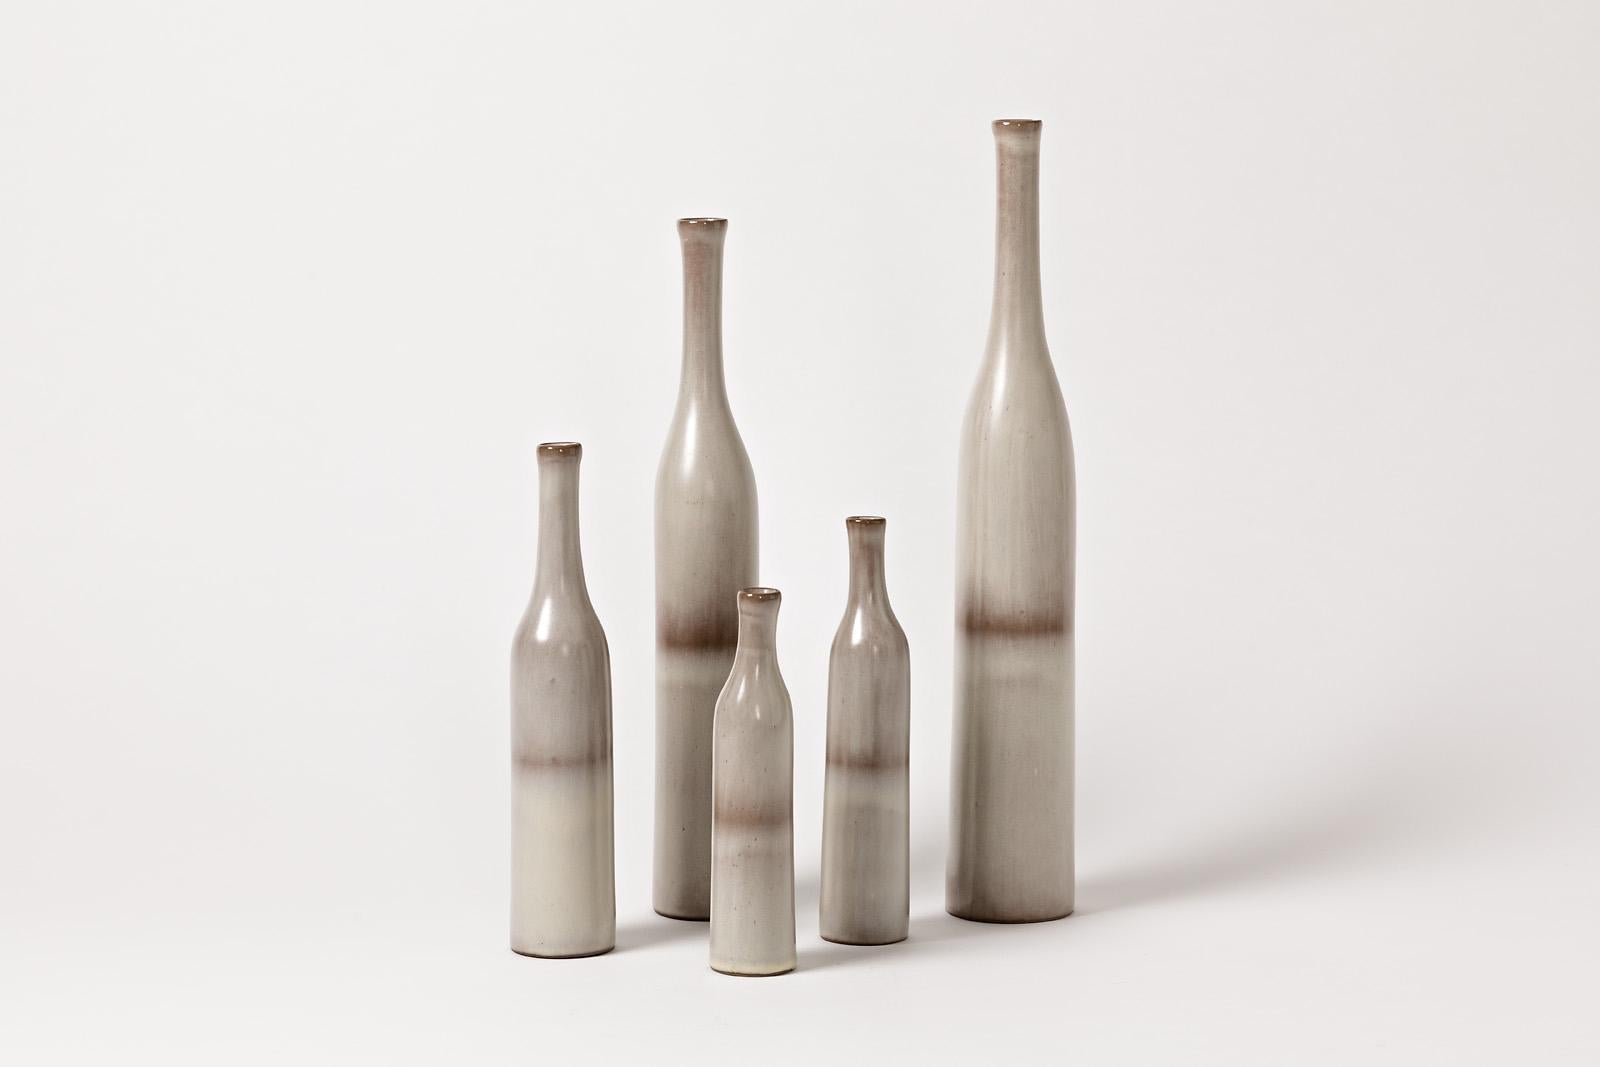 20th Century Set of 5 Ceramic Bottles White and Grey Colors by Ruelland Midcentury Design